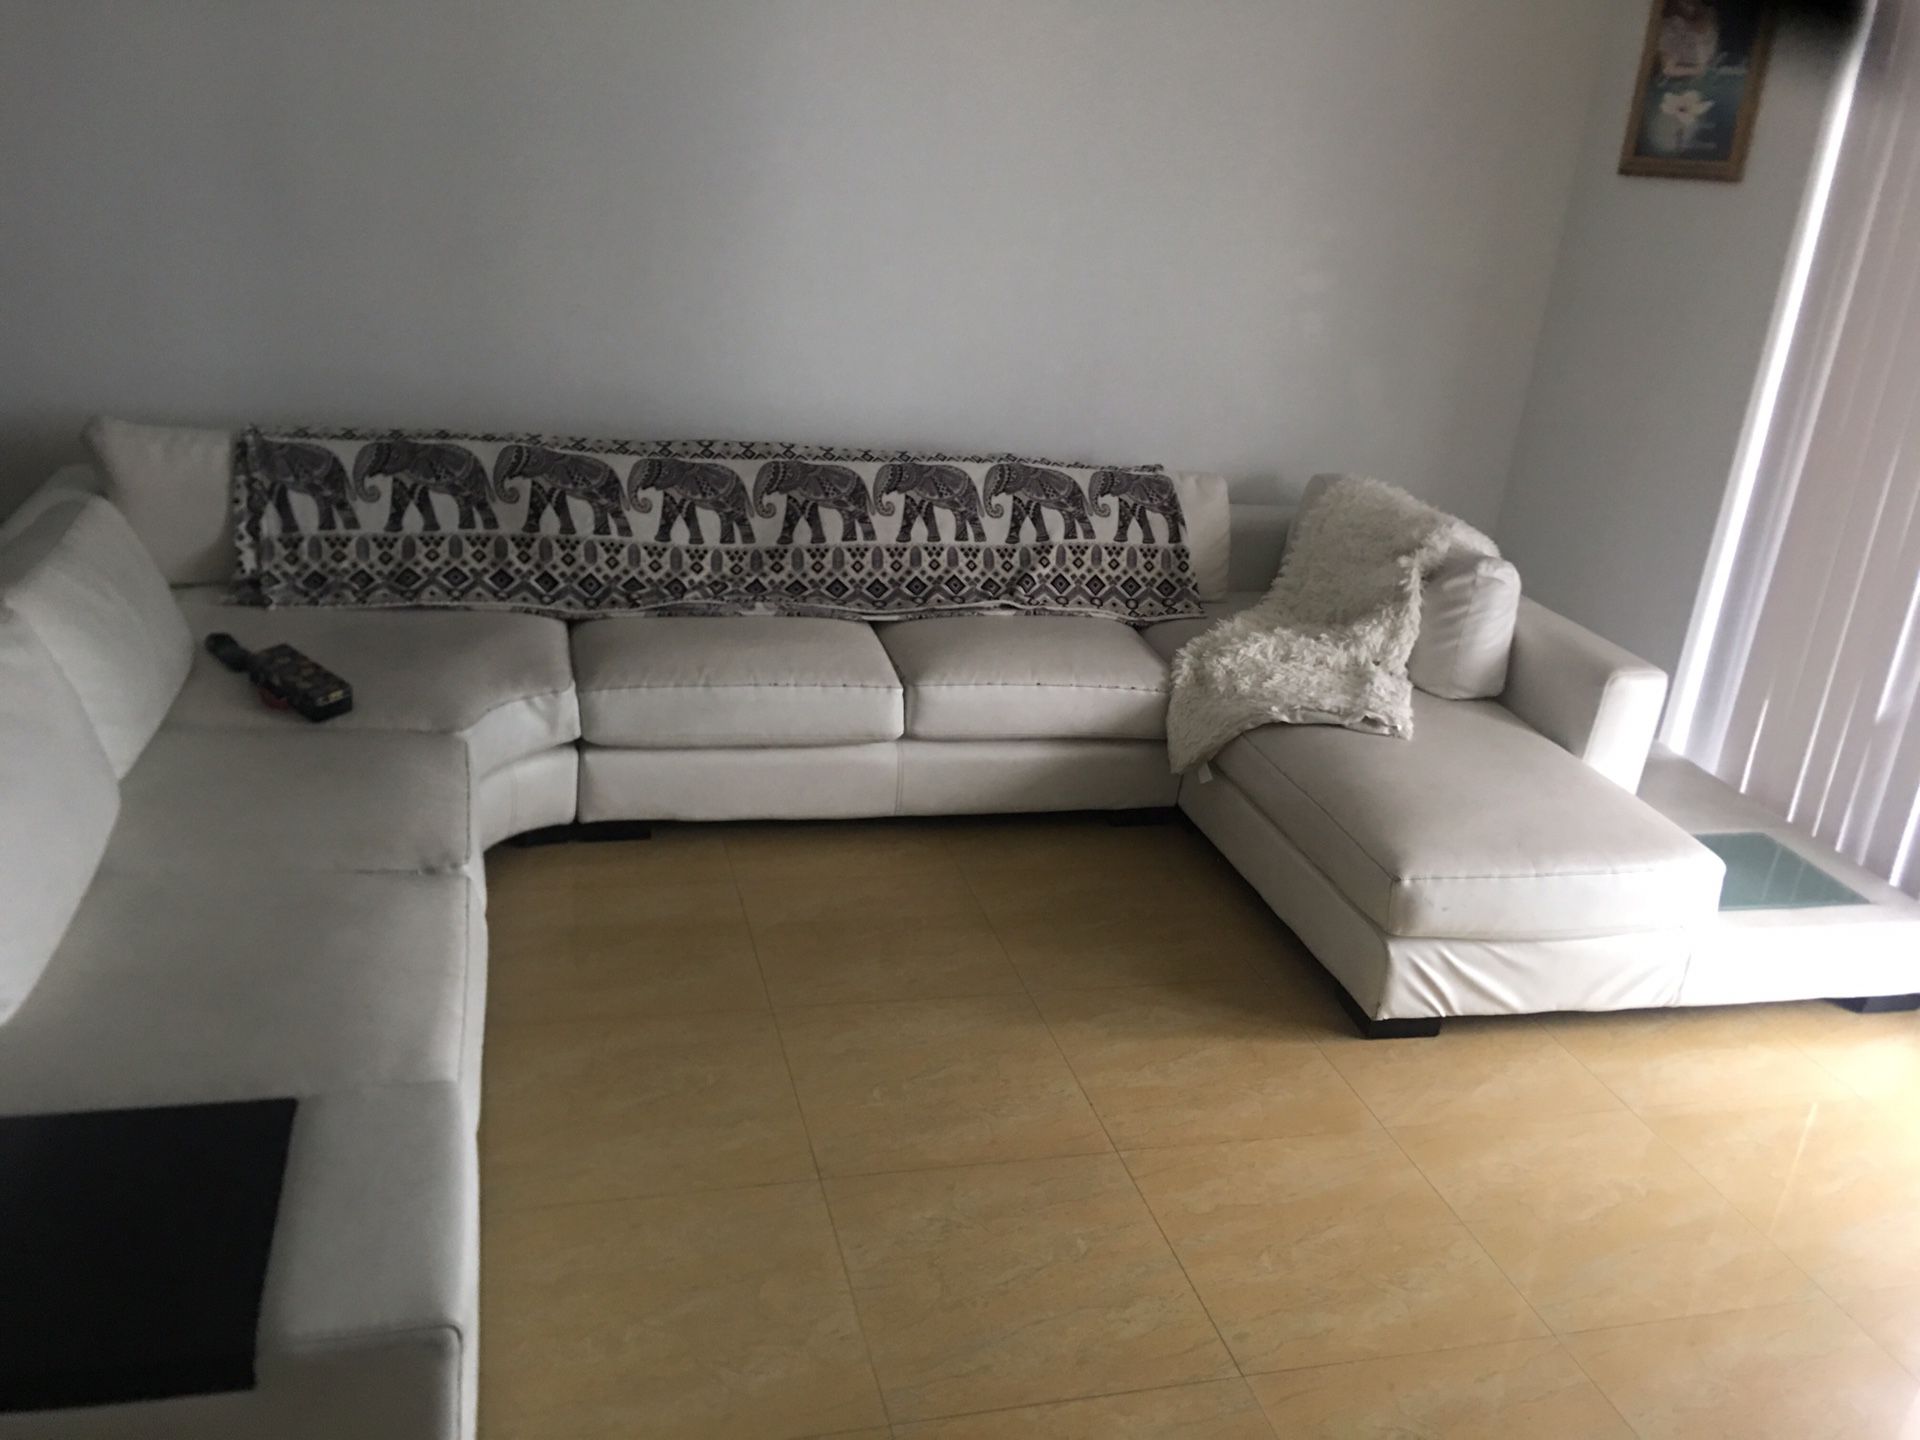 For sale white couch Italian leather